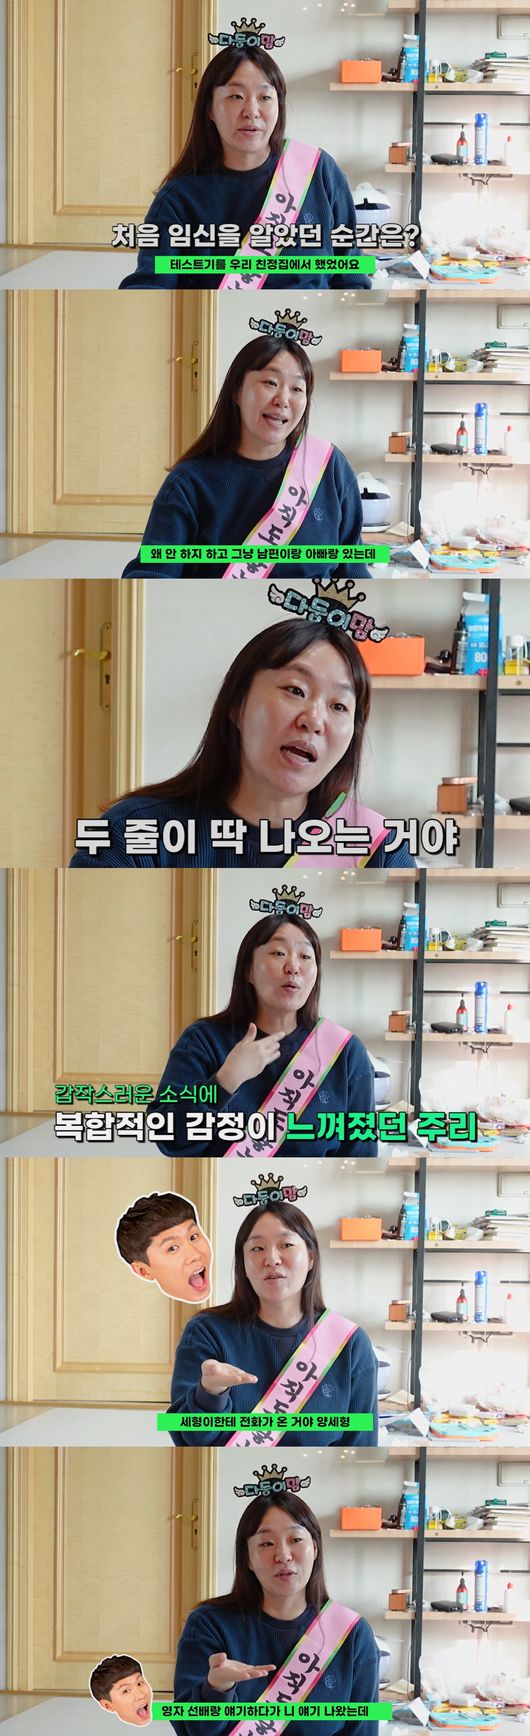 Jung Juri delivered fourth pregnancy behind-the-scenes Kahaani.On the 29th, Jung Juri went through his YouTube channel to pregnancy behind-the-scenes to Yang Se-hyeongs ssull!He posted the video and reported the pregnancy behind Kahaani.On this day, Jung Juri responded to the recent response that the house was too clean and disappointed, saying, I know how to deceive now. I put it everywhere.I just push it in these days, he laughed.Jung Juri then opened the door of the room saying, This is fun again. The room was full of hidden clutter and made the surroundings laugh.Jung Juri revealed another room, saying, I am good with a lot of laundry. However, unlike Jung Juris words, the room laughed again in a frenzy.I dont write stylists separately; stylist Sister got married and went to America, Jung Juri said.Jung Juri said, The size 55 of the clothes is the most easy to get.But I wanted to wear my clothes because I was feeling less and less because of the pregnancy. Jung Juri told the fourth pregnancy behind-the-scenes story: I did the test at my home, Husband was going to a convenience store and I bought one.Then I came out just two lines. I was tearful because I had various feelings. My father sighed and went out.Jung Juri said, I was crying and I got a call from Se-hyung. I talked to my English senior and said that I called because I thought of it.So, I first knew him. I did not go to the hospital, so I asked him to keep it secret. Jung Juri said, The mouth is really heavy. From the moment of the test, the boat came out, so everyone noticed.So I talked to the people around me, but only the three were keeping secrets. Jung Juri then laughed, saying, I met my brother-in-law and asked if I should keep a secret. I told him that I could talk because I got a story.